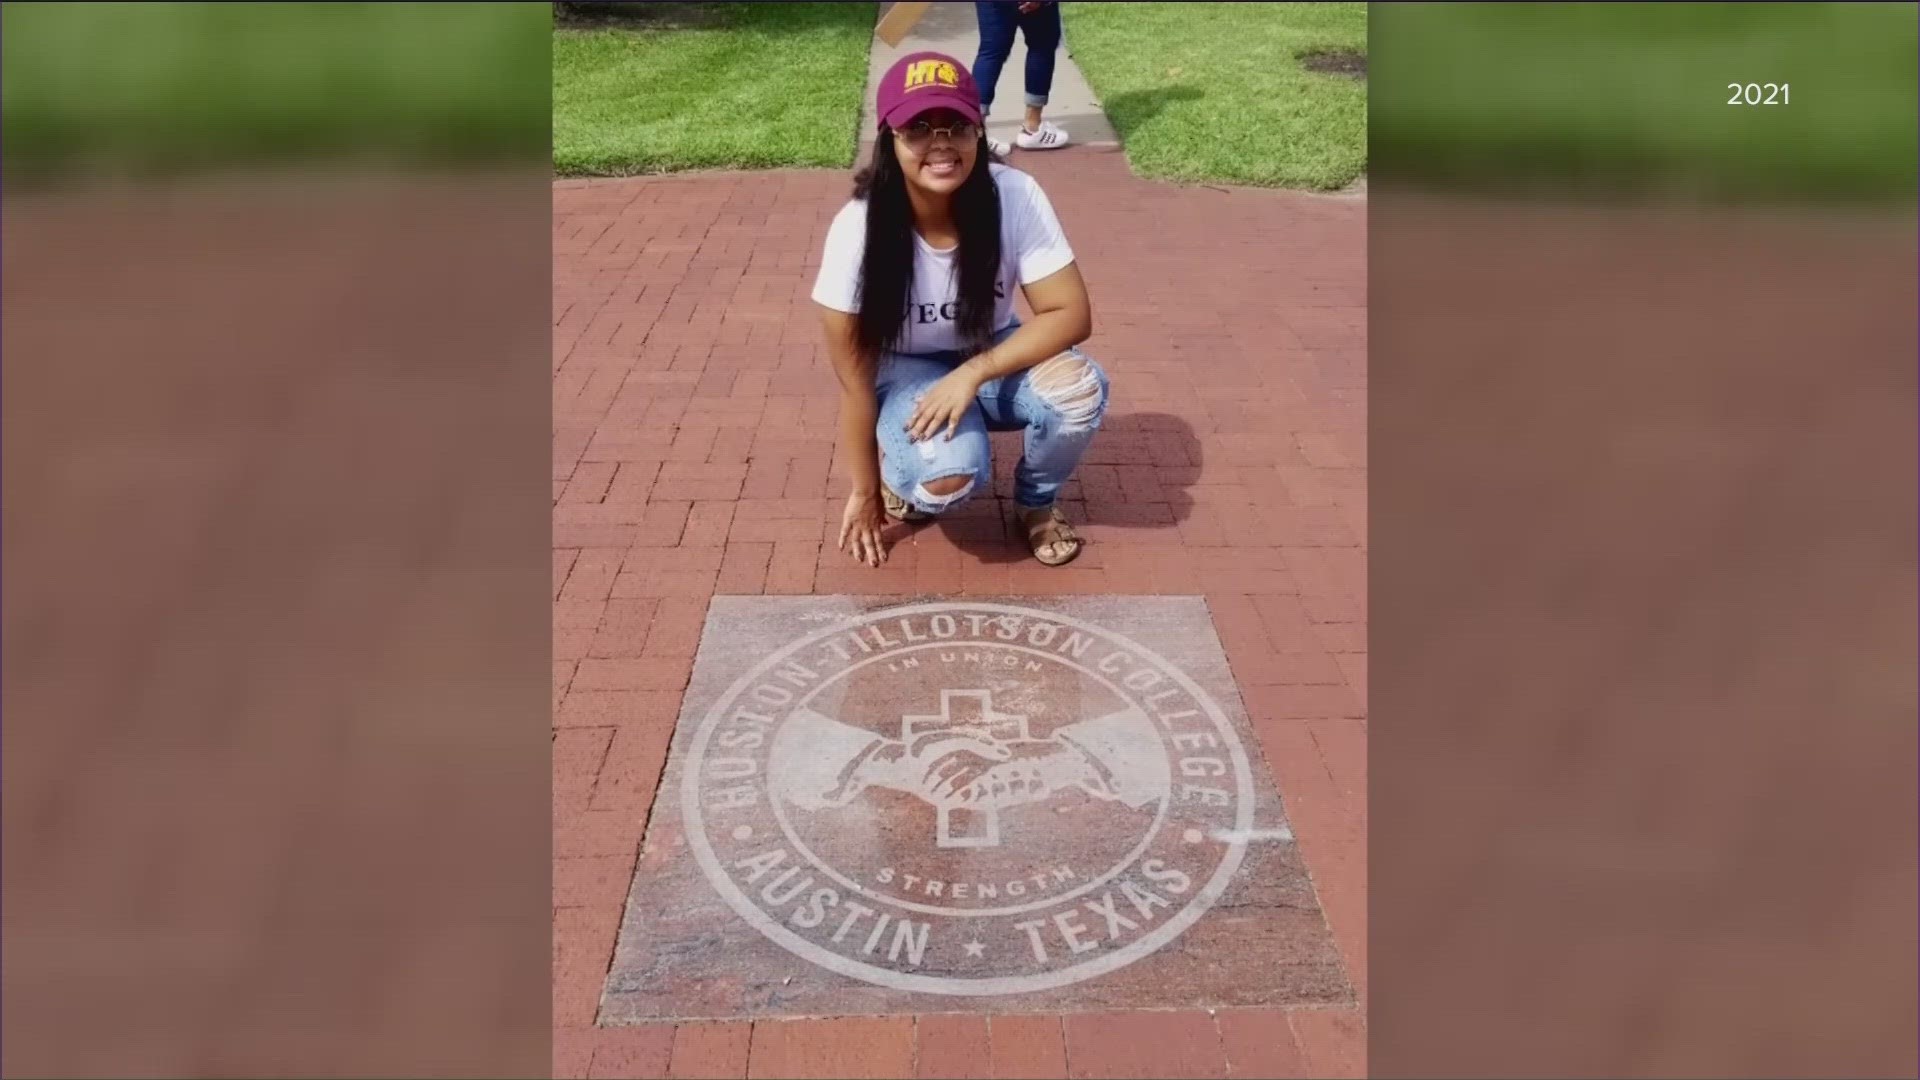 It's named after Huston-Tillotson University student Natalia Cox, who was murdered two years ago.